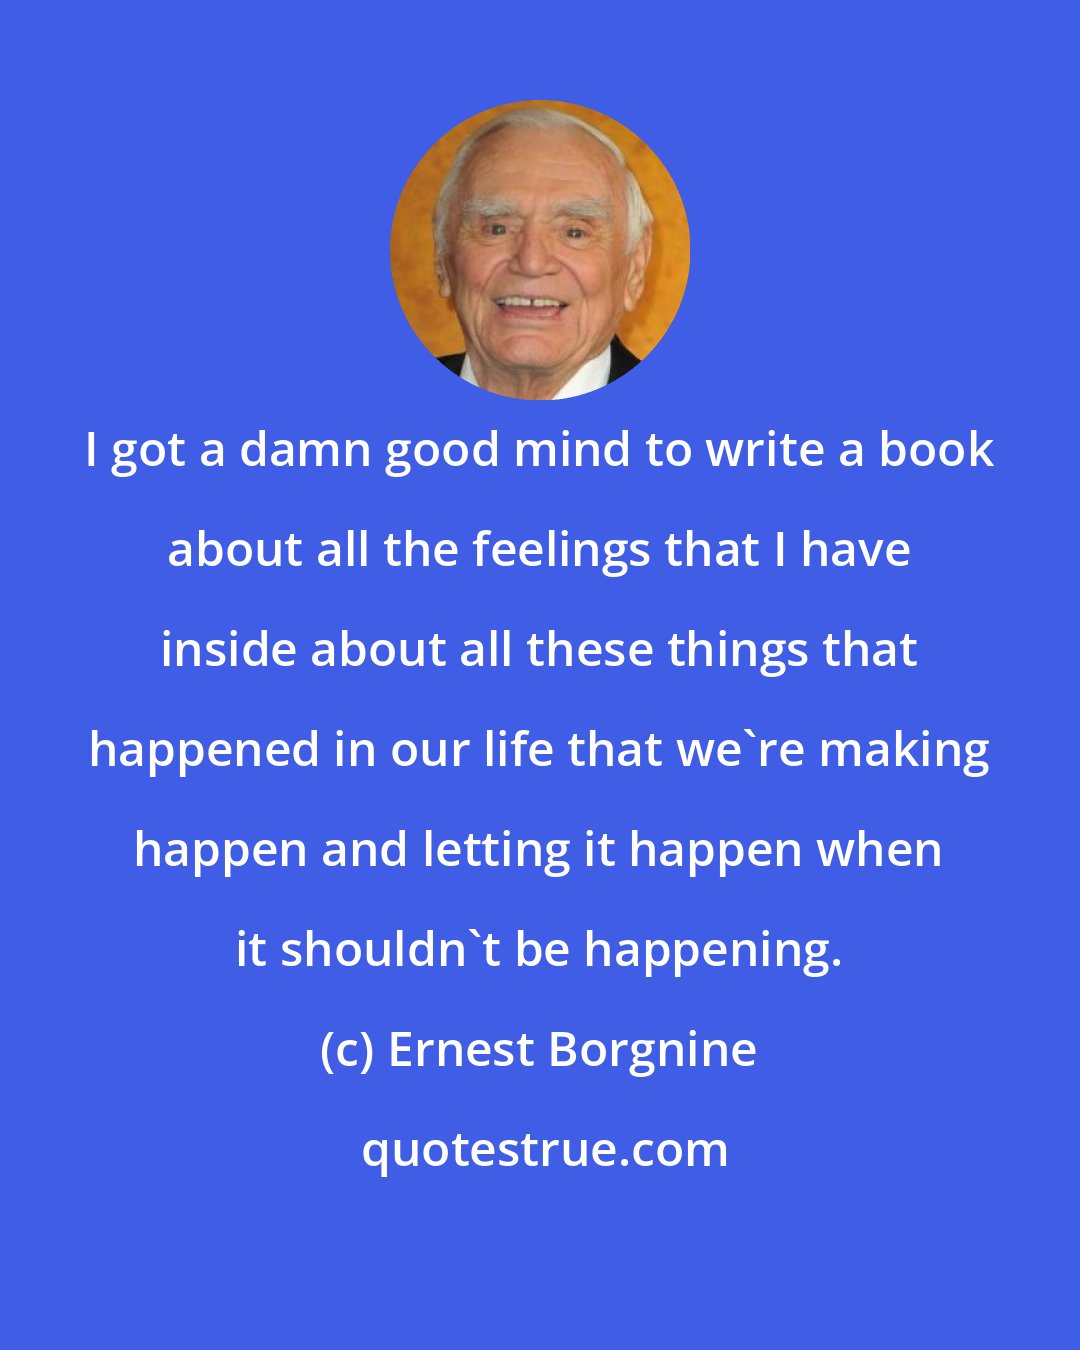 Ernest Borgnine: I got a damn good mind to write a book about all the feelings that I have inside about all these things that happened in our life that we're making happen and letting it happen when it shouldn't be happening.